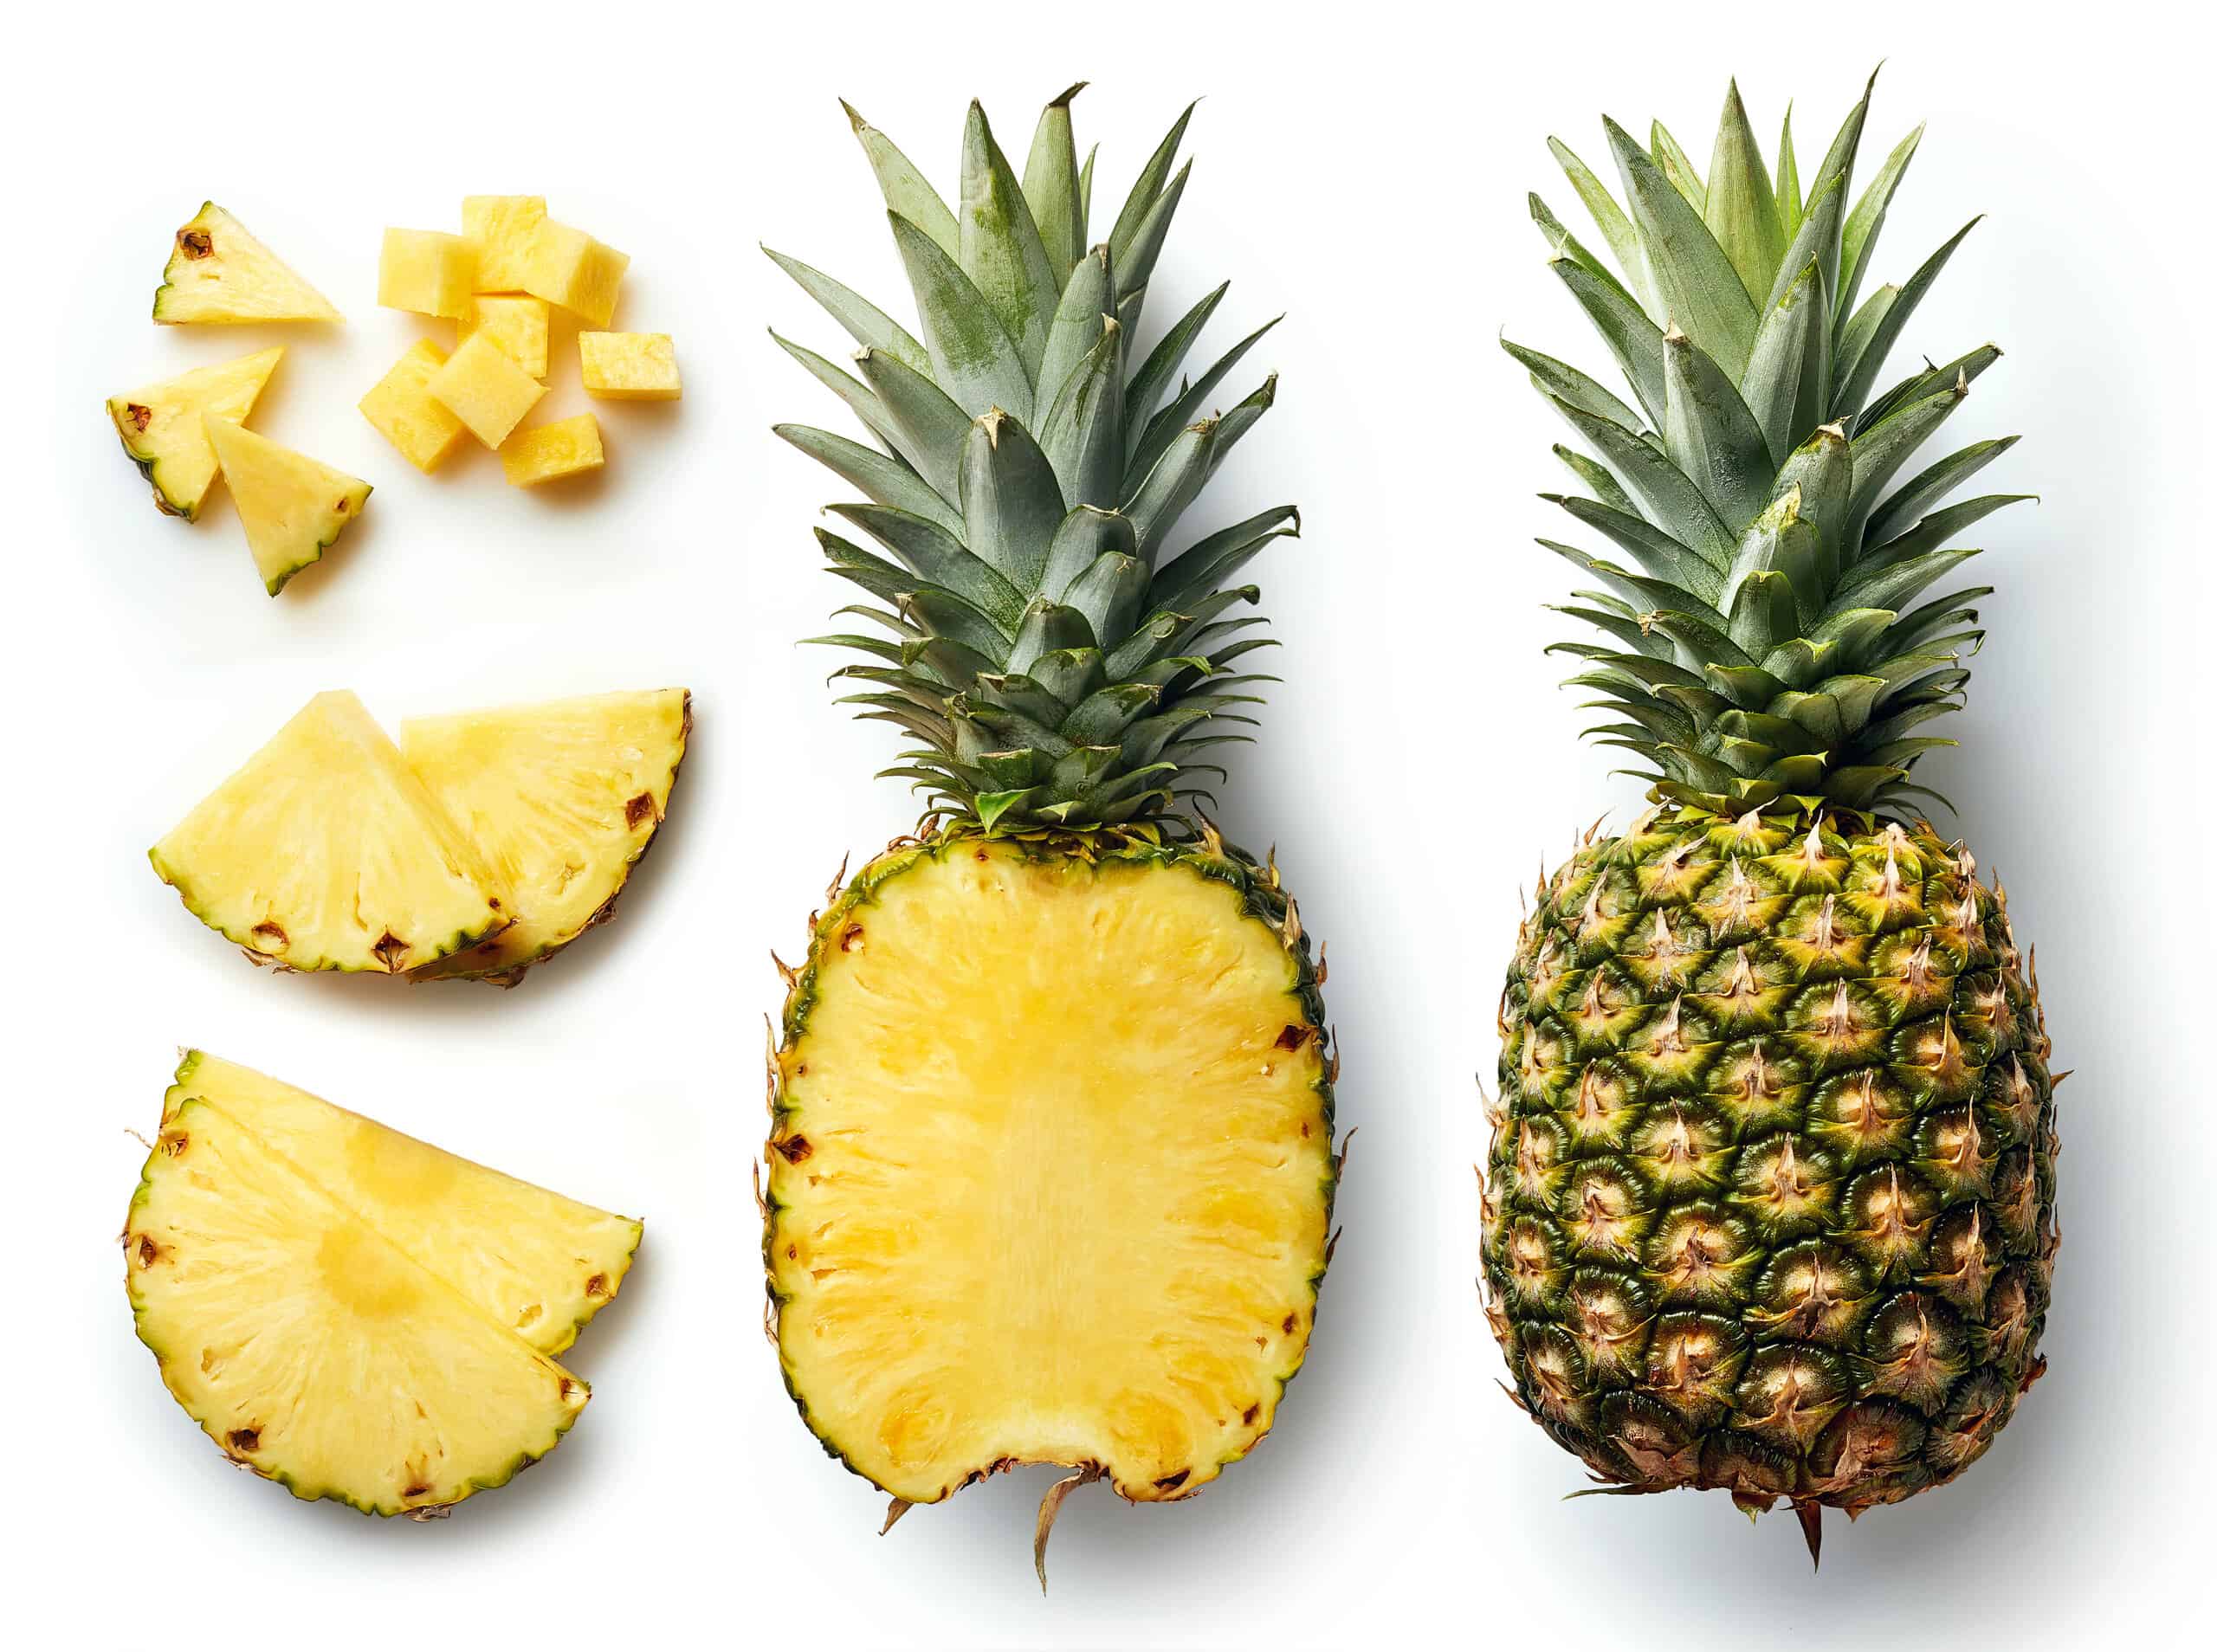 Where Are The Seeds In A Pineapple